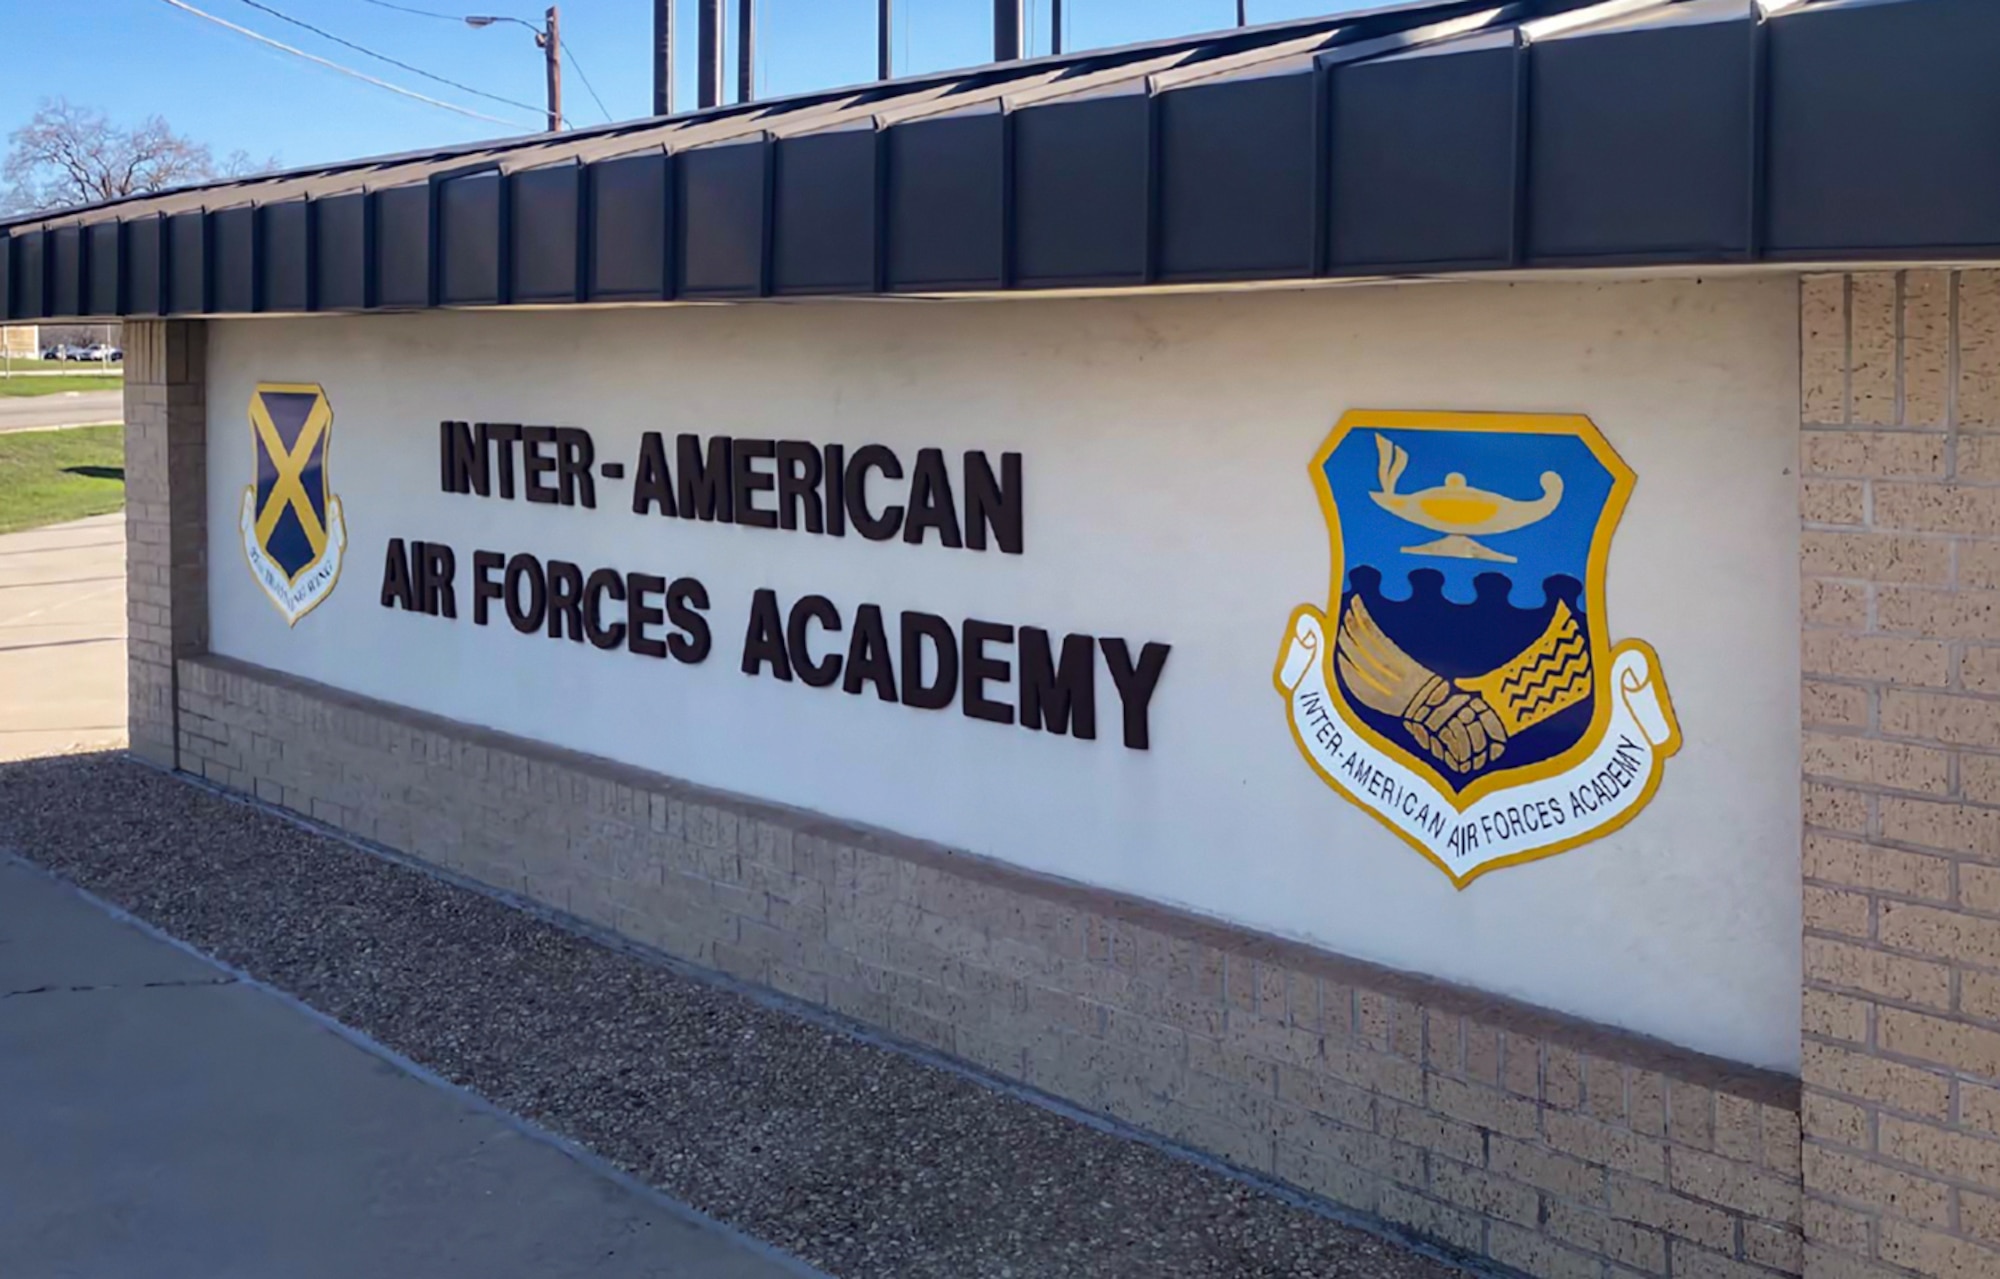 Inter-American Air Forces Academy